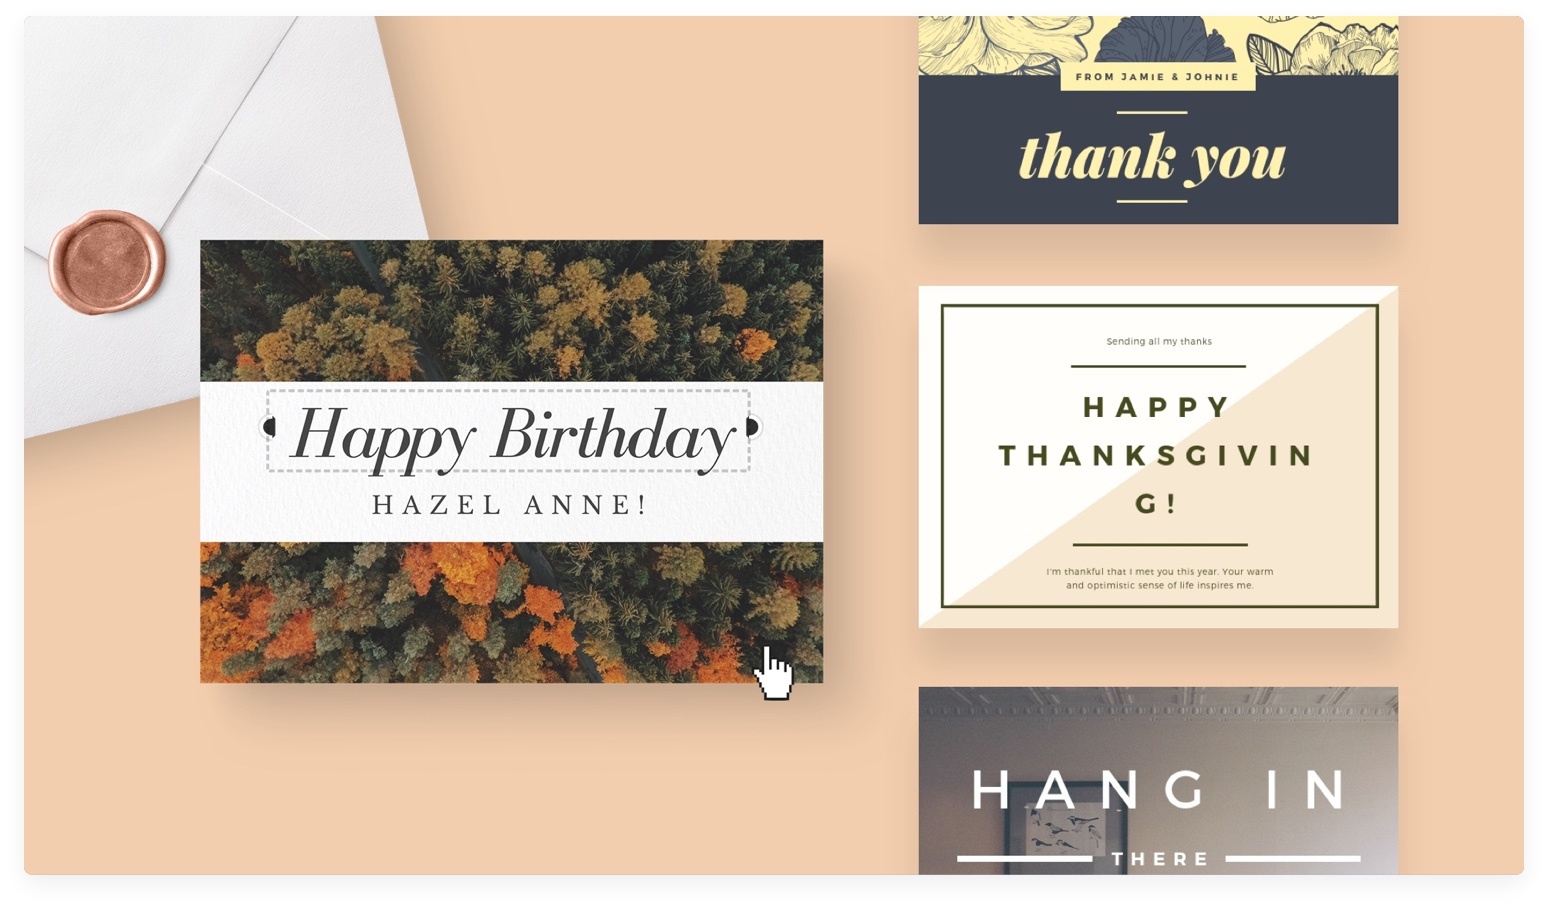 Free Online Card Maker: Create Custom Designs Online | Canva - Make Your Own Printable Birthday Cards Online Free